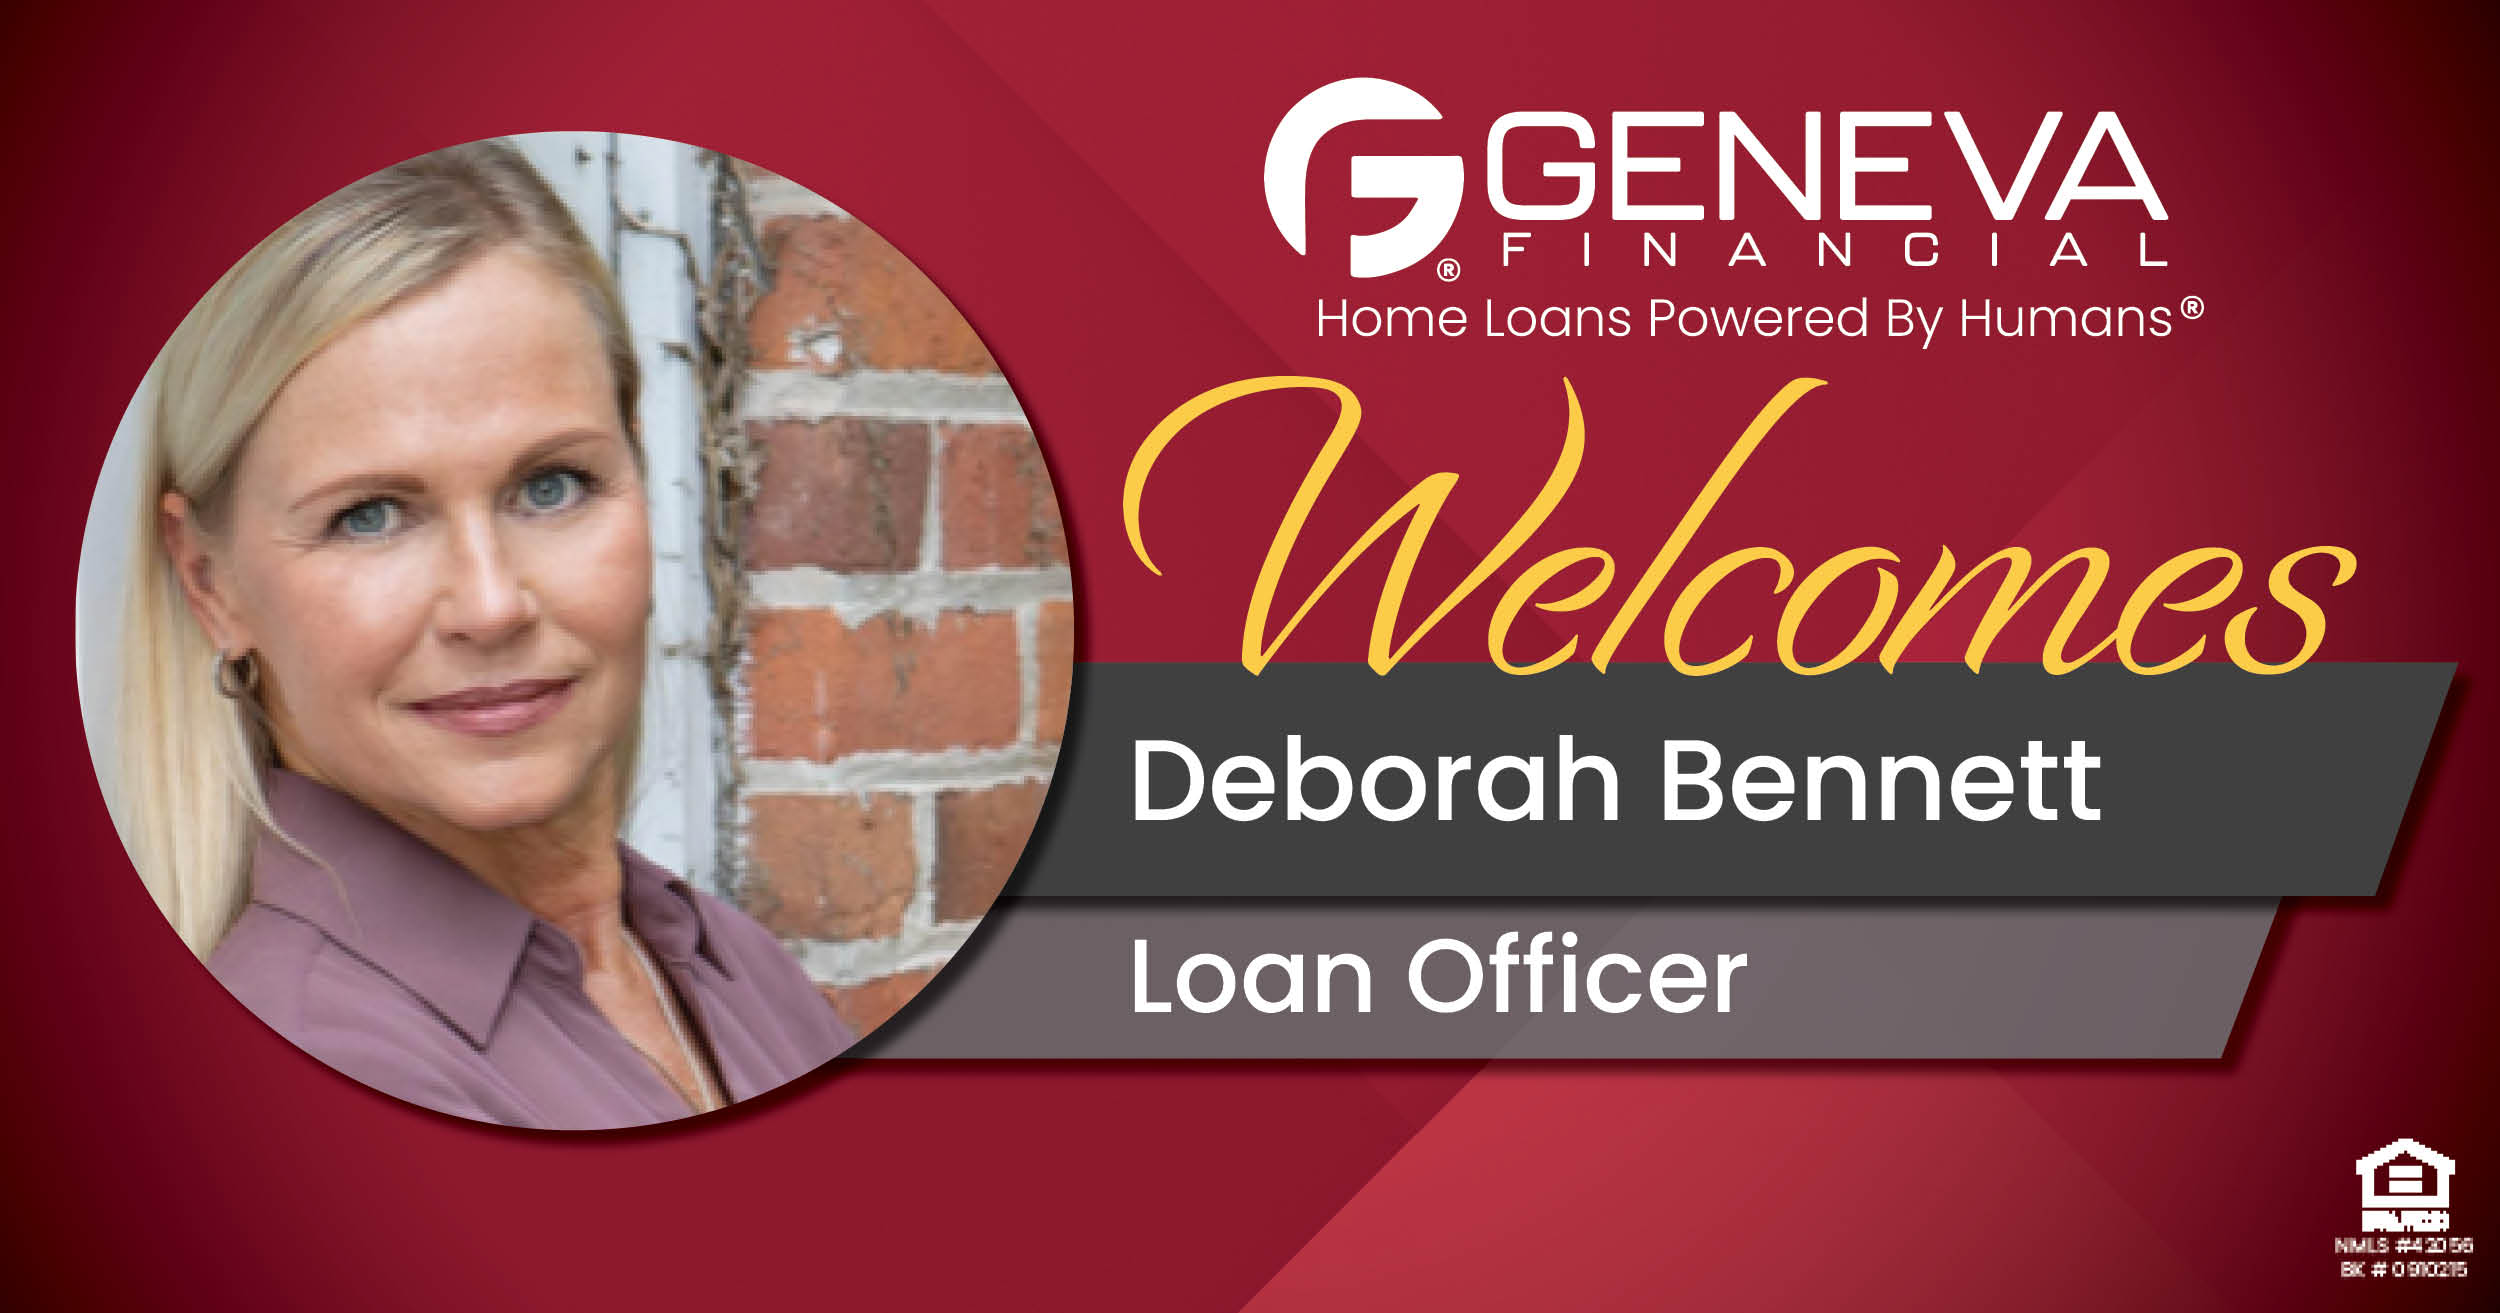 Geneva Financial Welcomes New Loan Officer Deborah Bennett to Indiana Market – Home Loans Powered by Humans®.